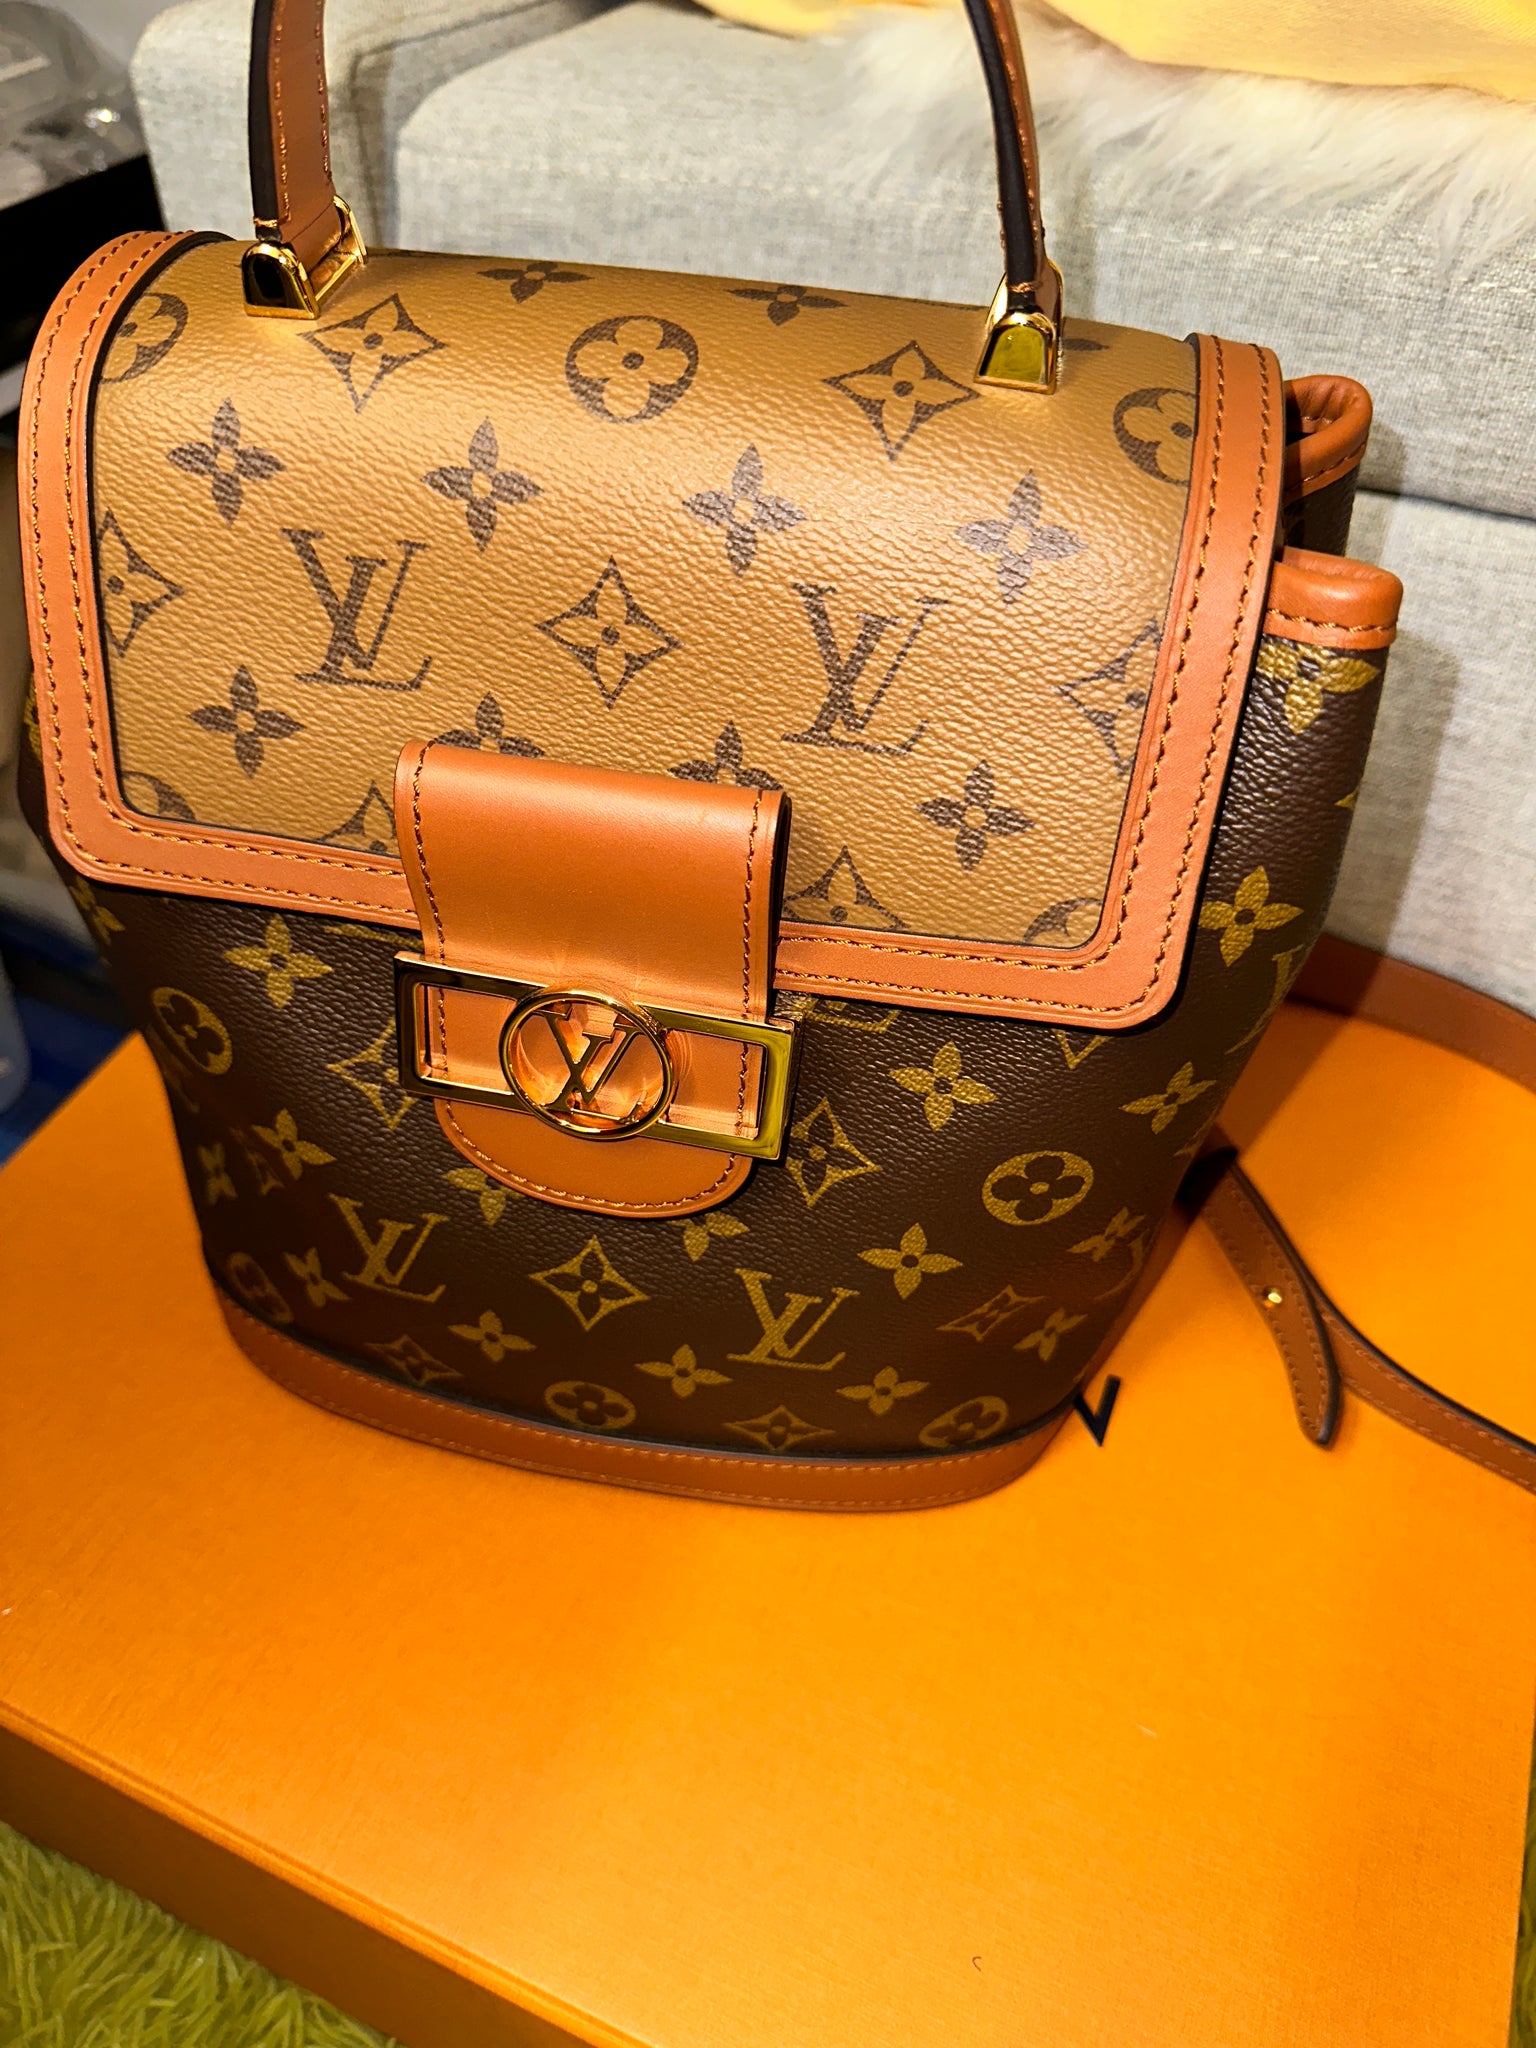 Louis Vuitton Dauphine Backpack